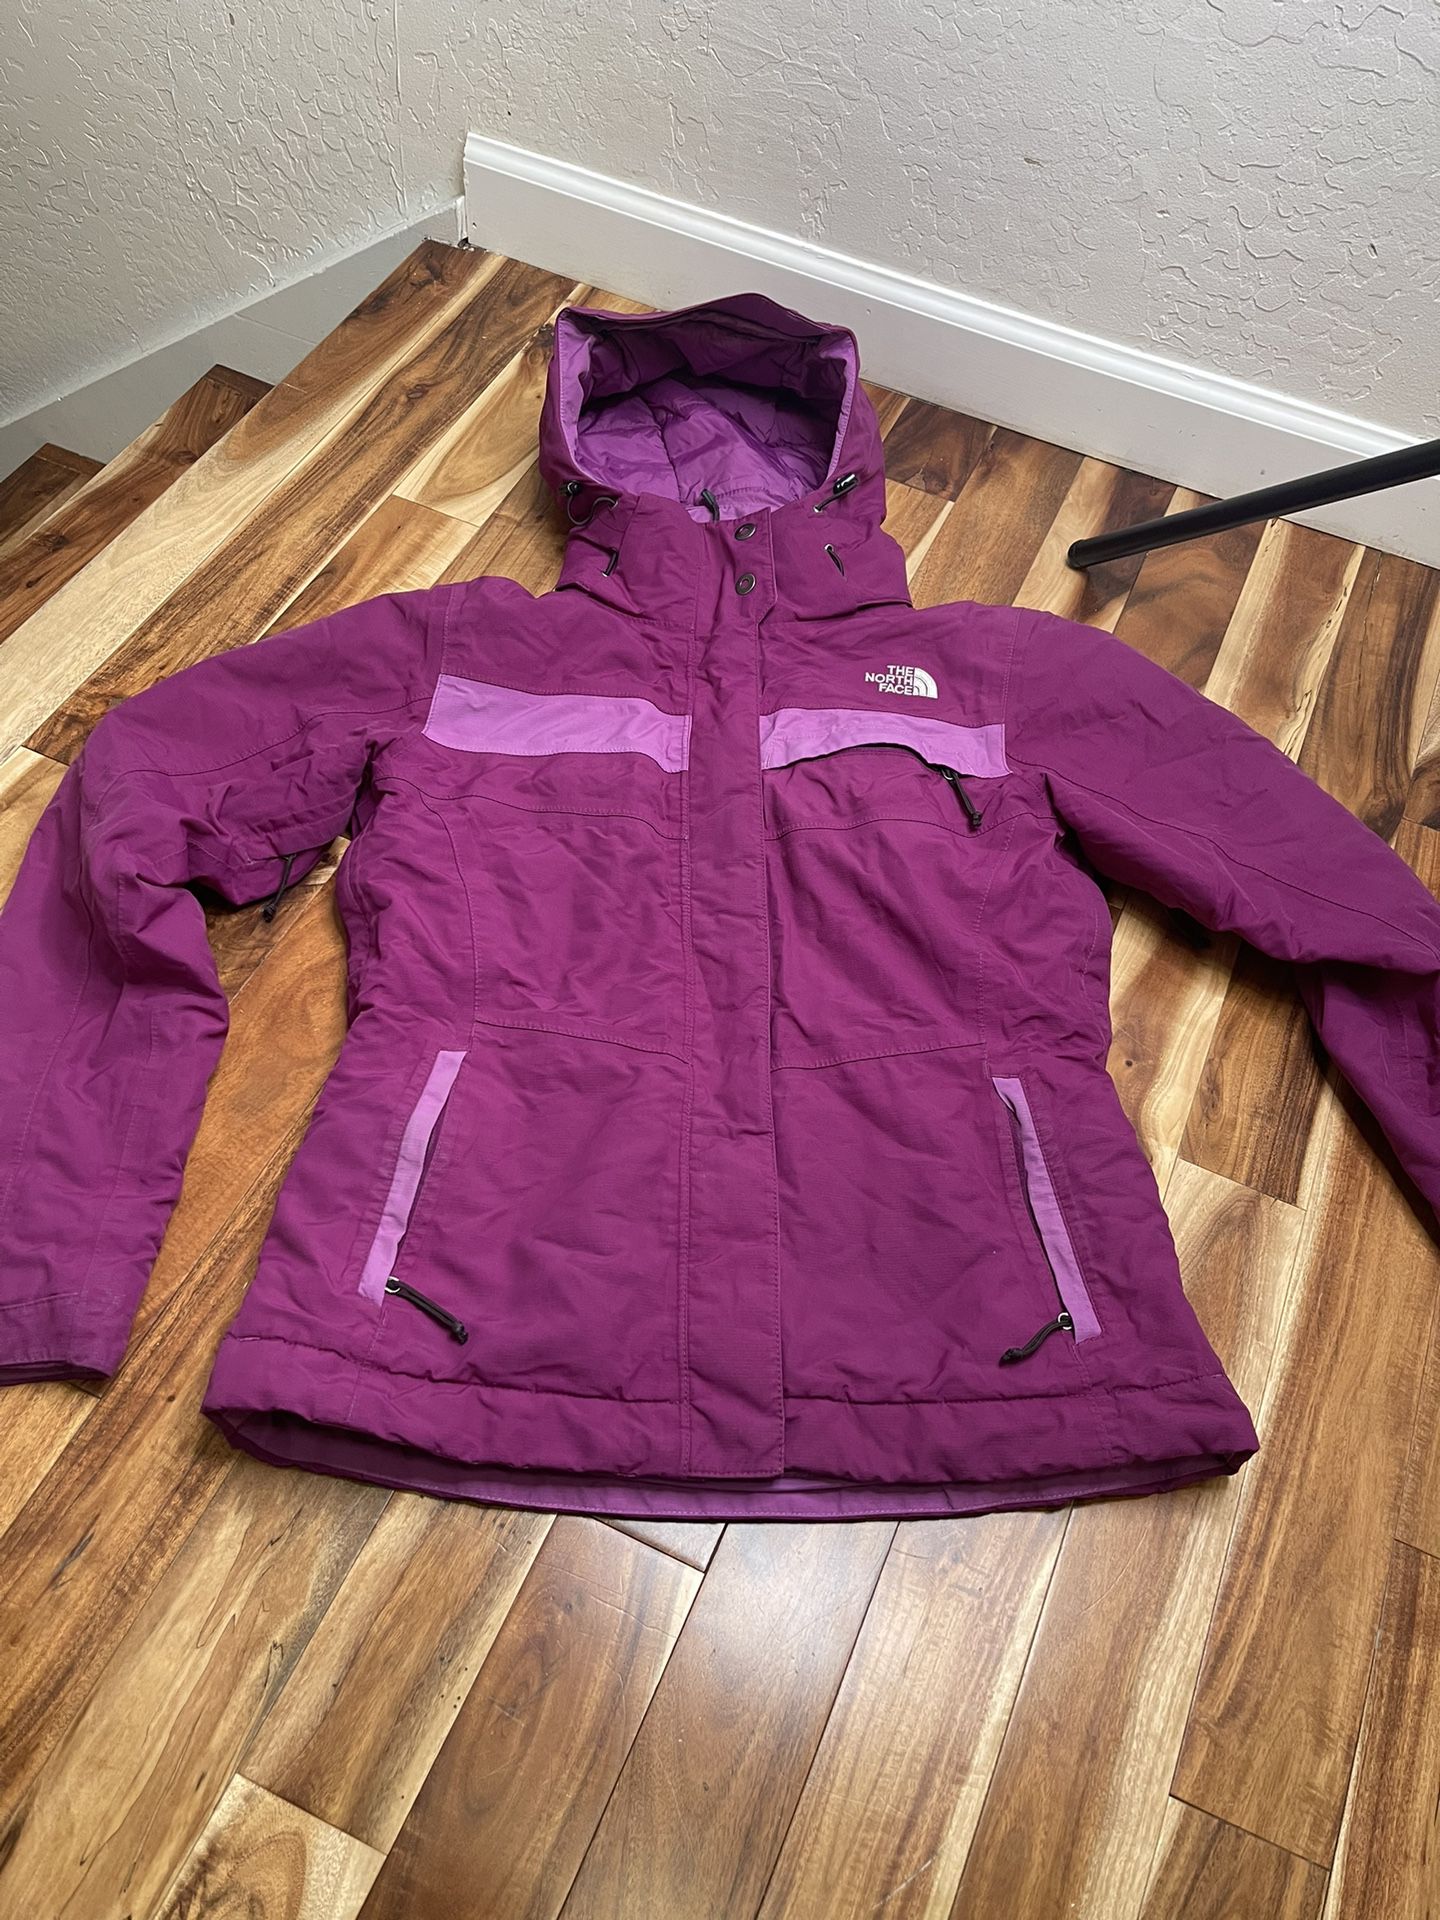 The North Face Women’s Winter Jacket Size S/P